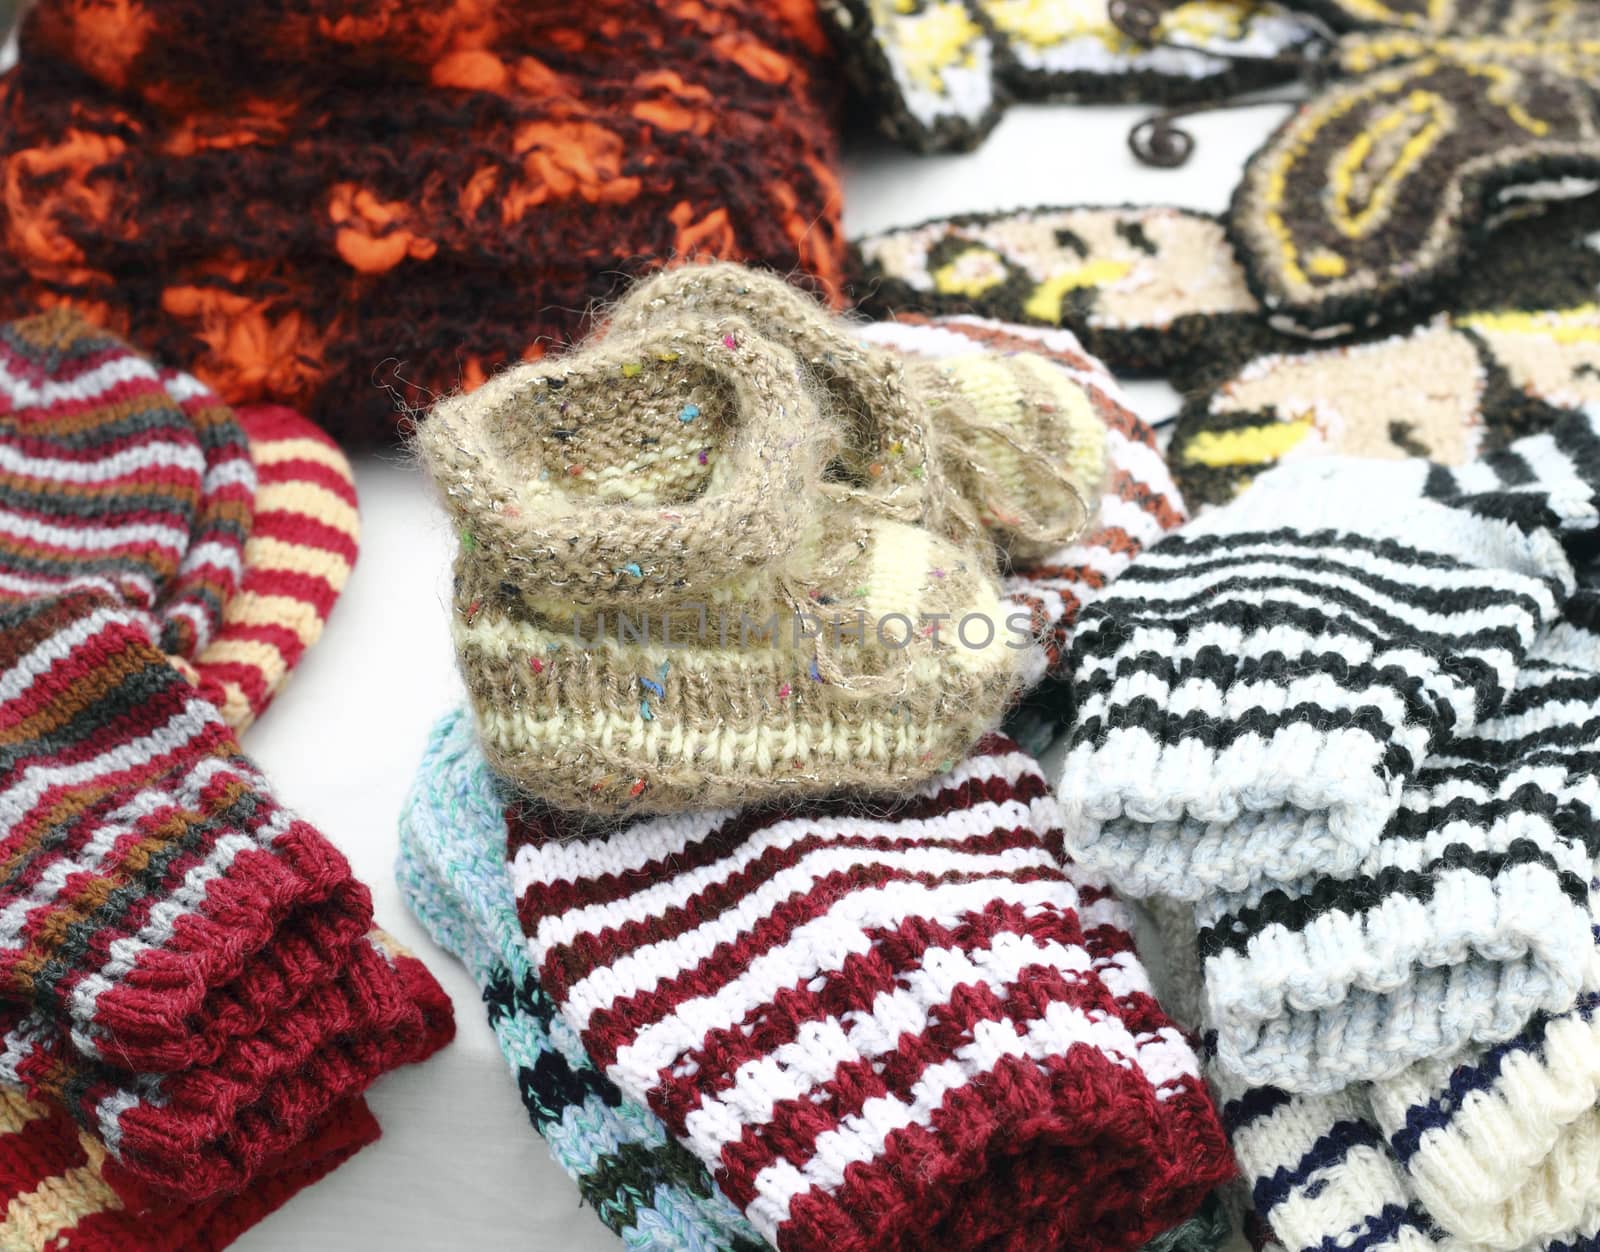 preparing for winter, hand knitted baby booties